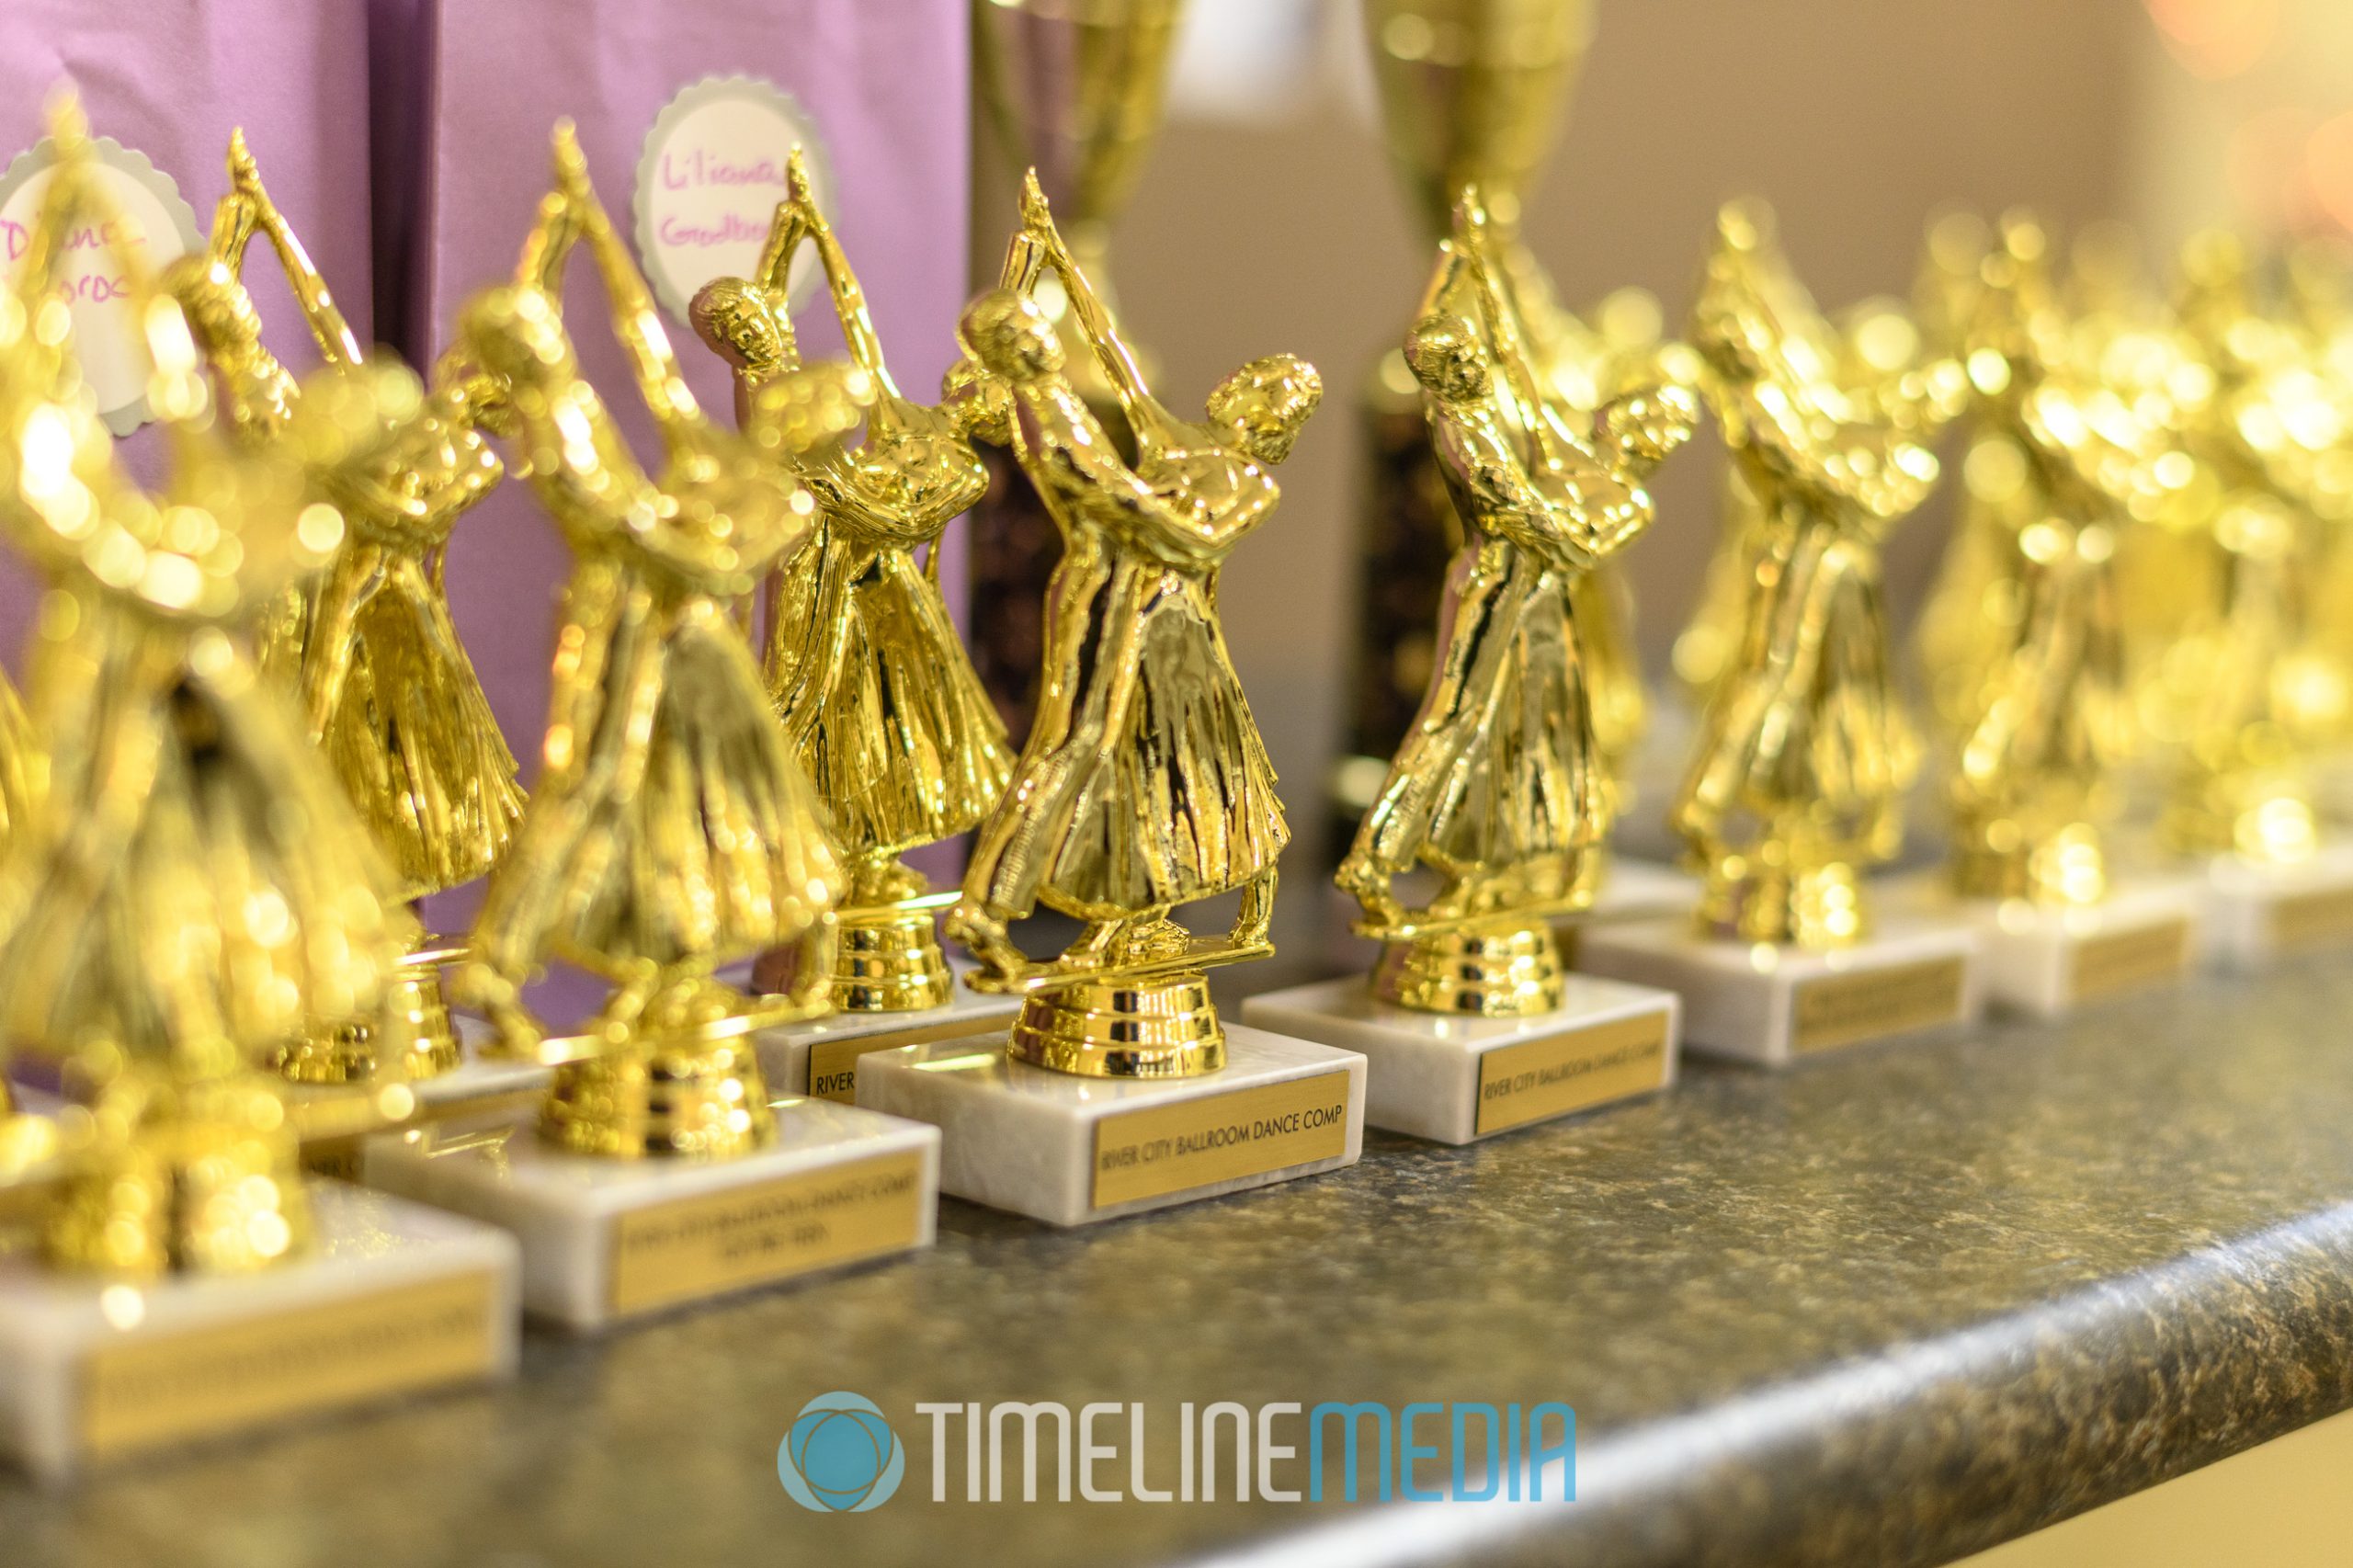 Awards at the 2018 River City Ballroom Dance Competition ©TimeLine Media